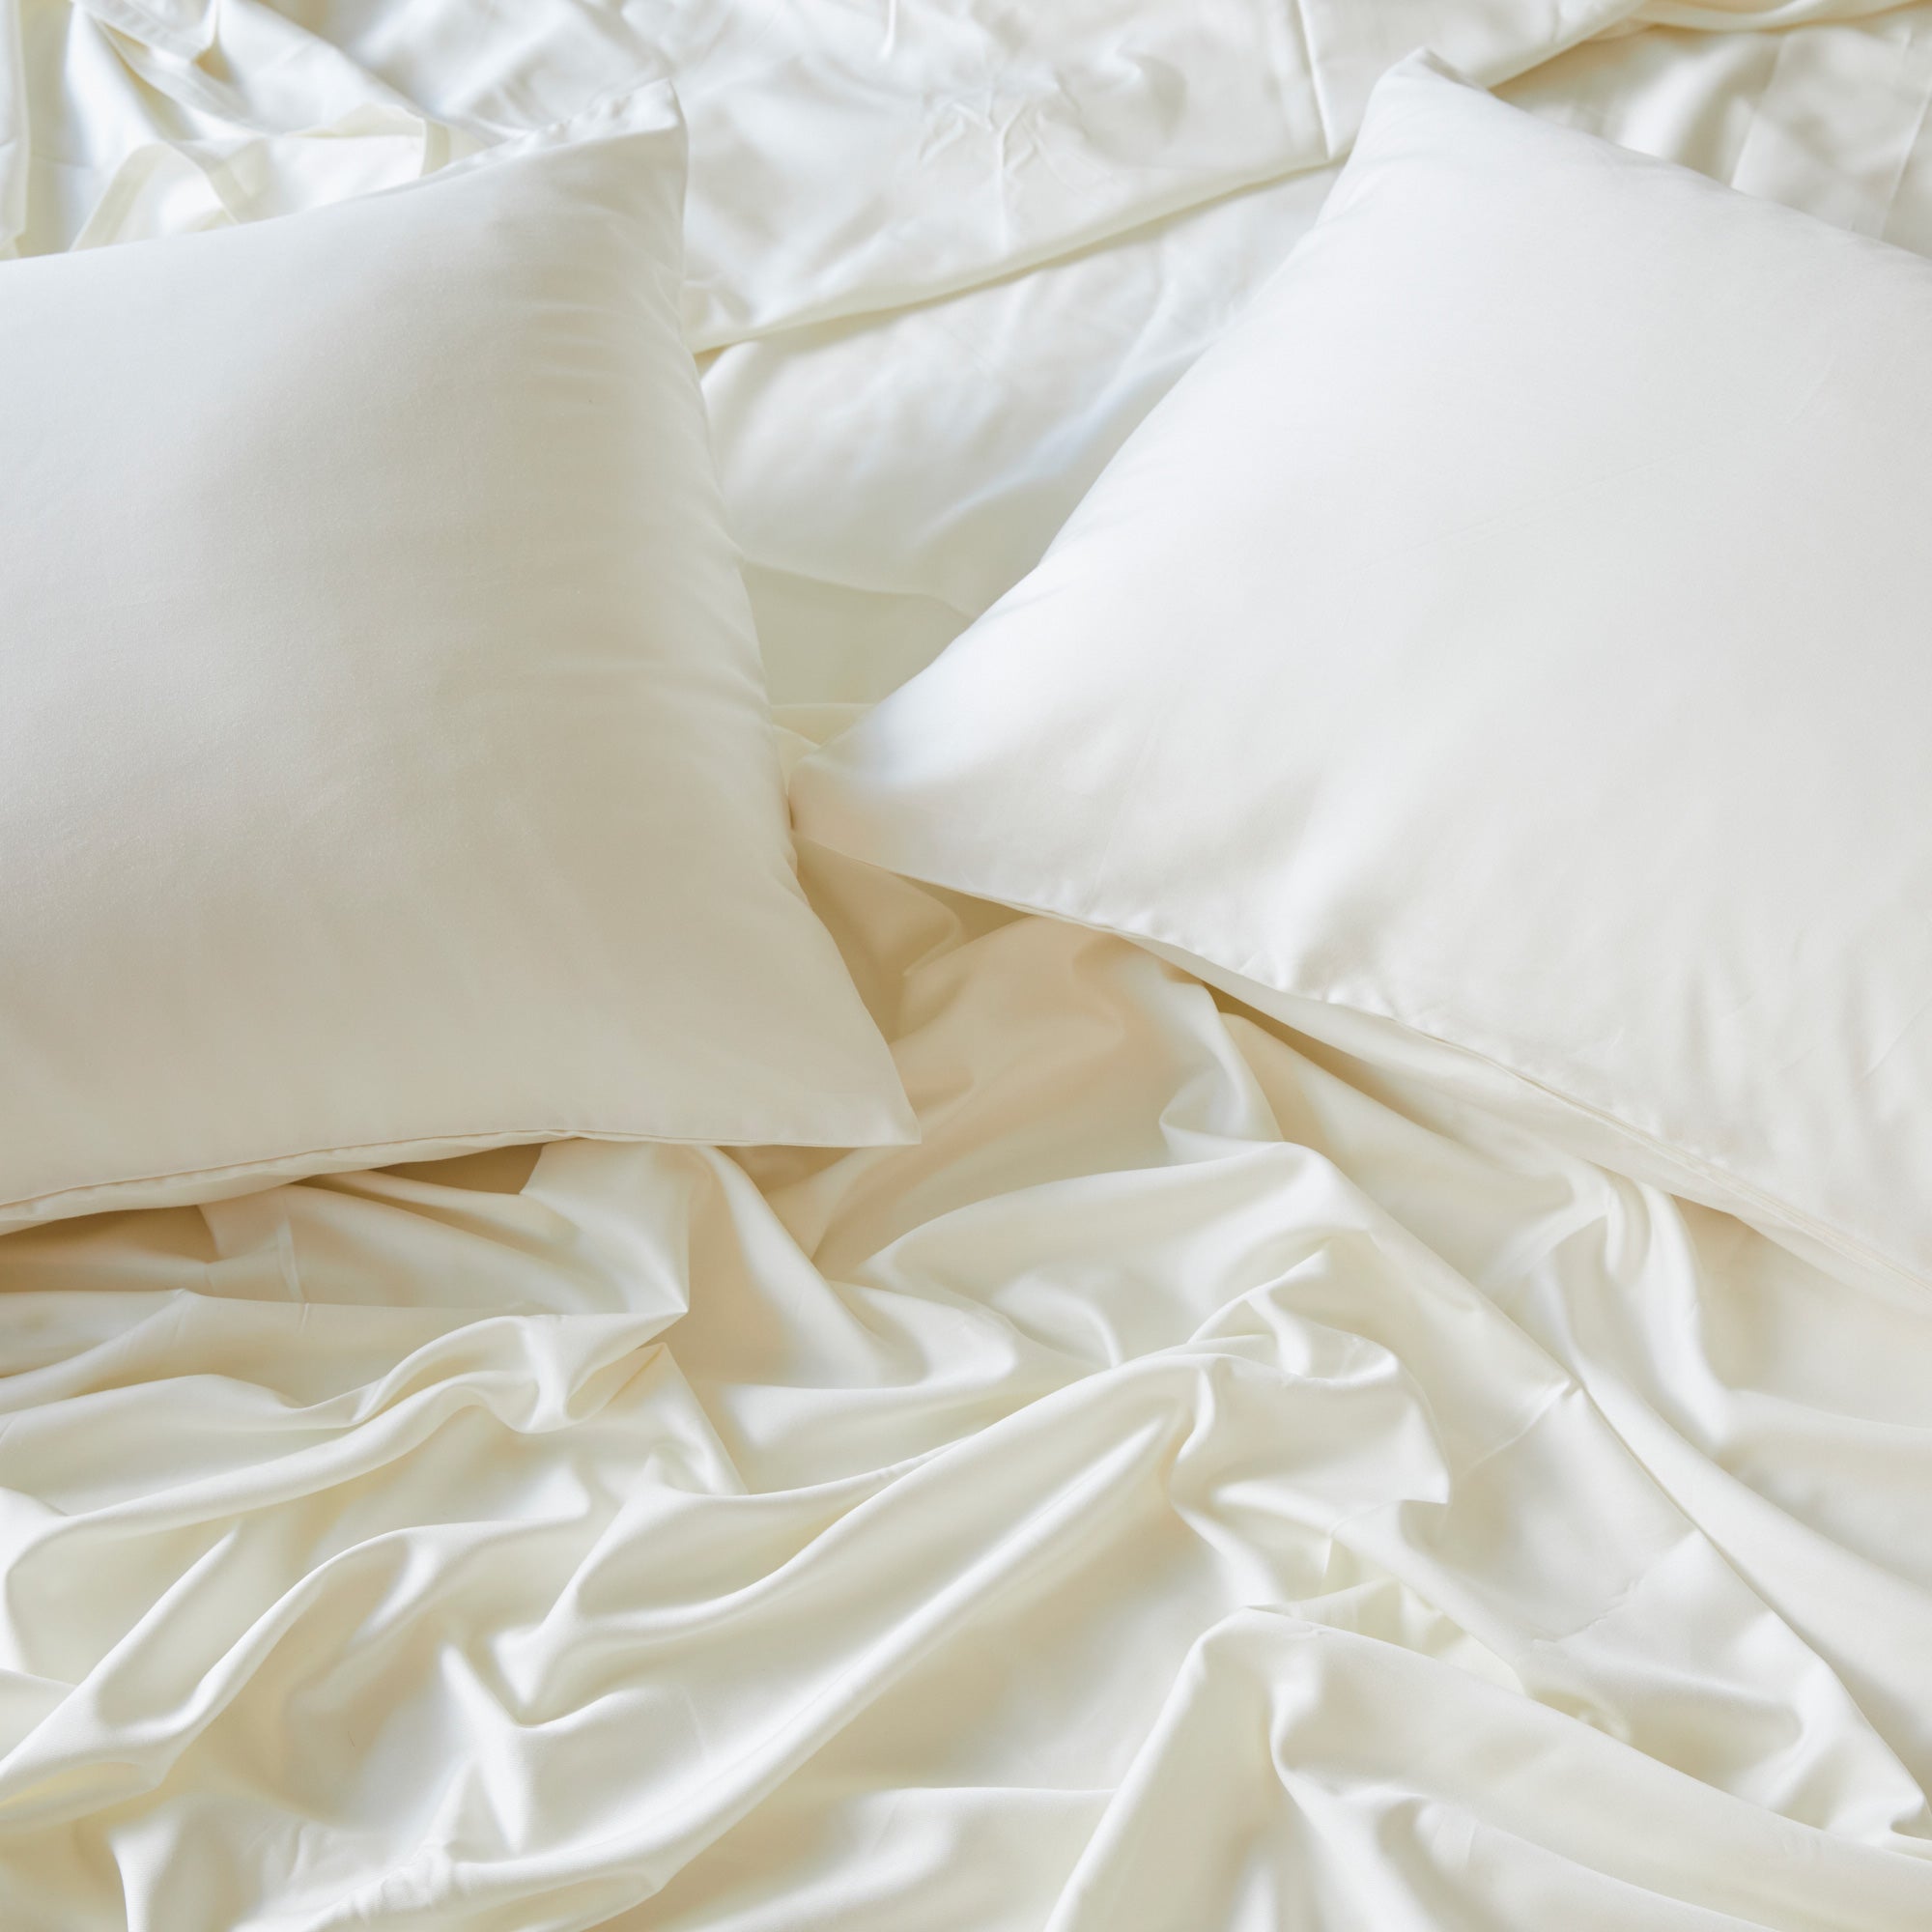 2 ivory bamboo pillowcases on pillows with a flat sheet in an elegant bed